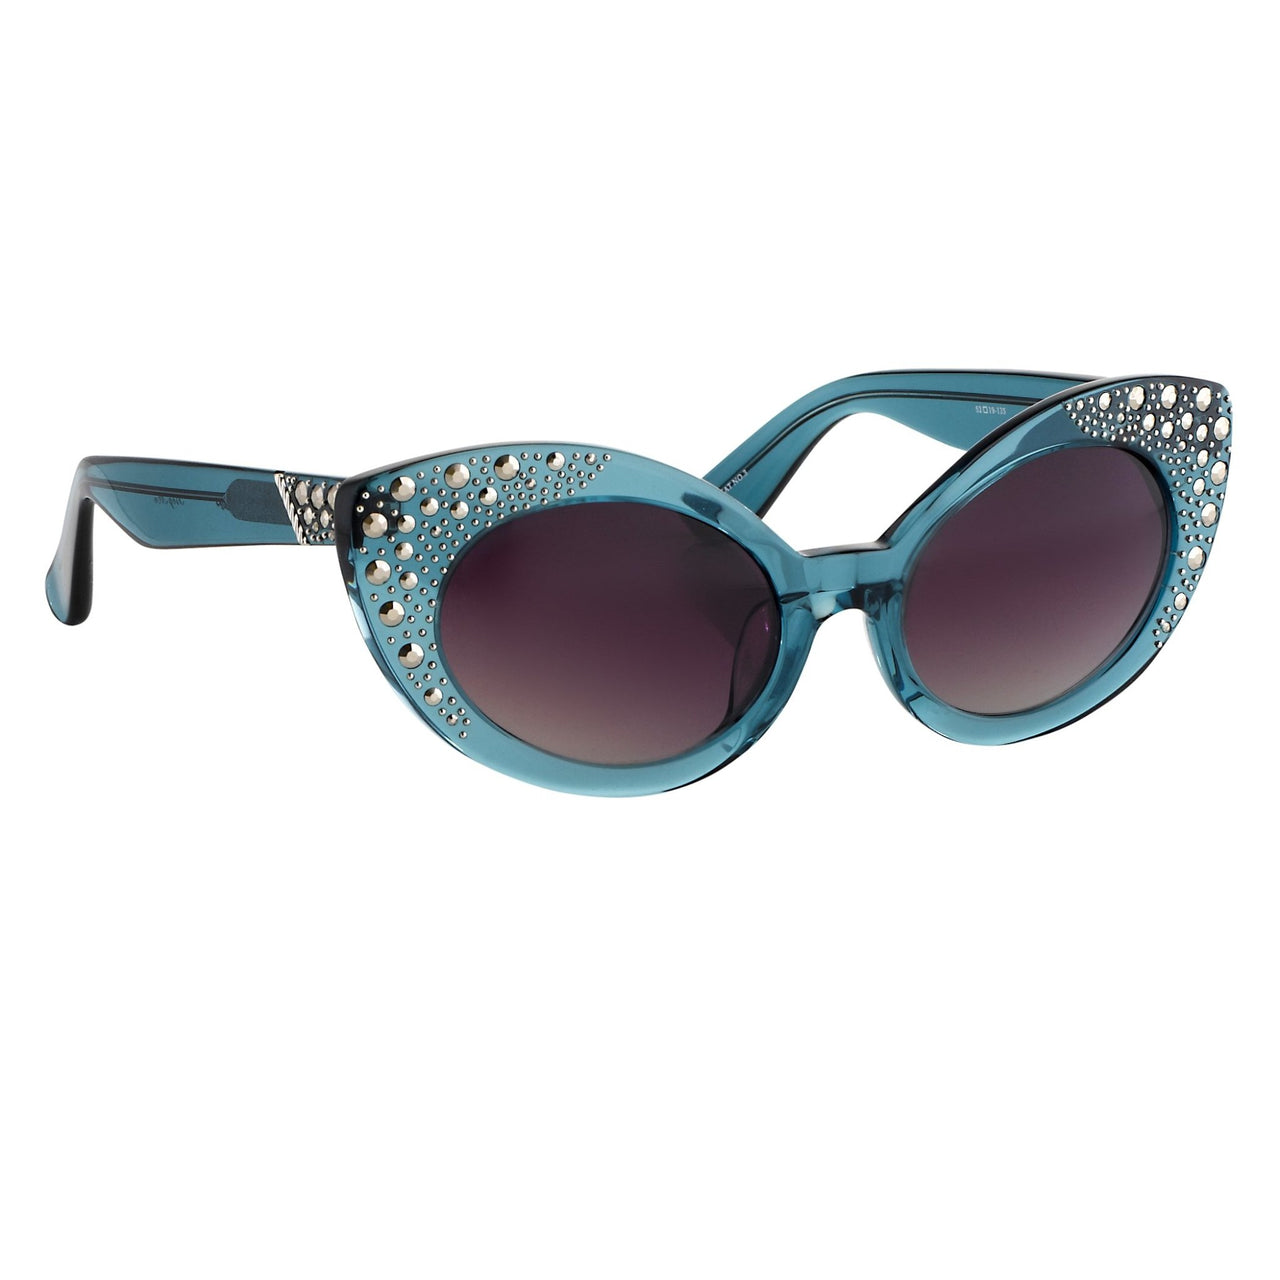 Agent Provocateur Women Sunglasses Oval Blue and Grey Lenses Category 3 - AP1C5SUN - Watches & Crystals